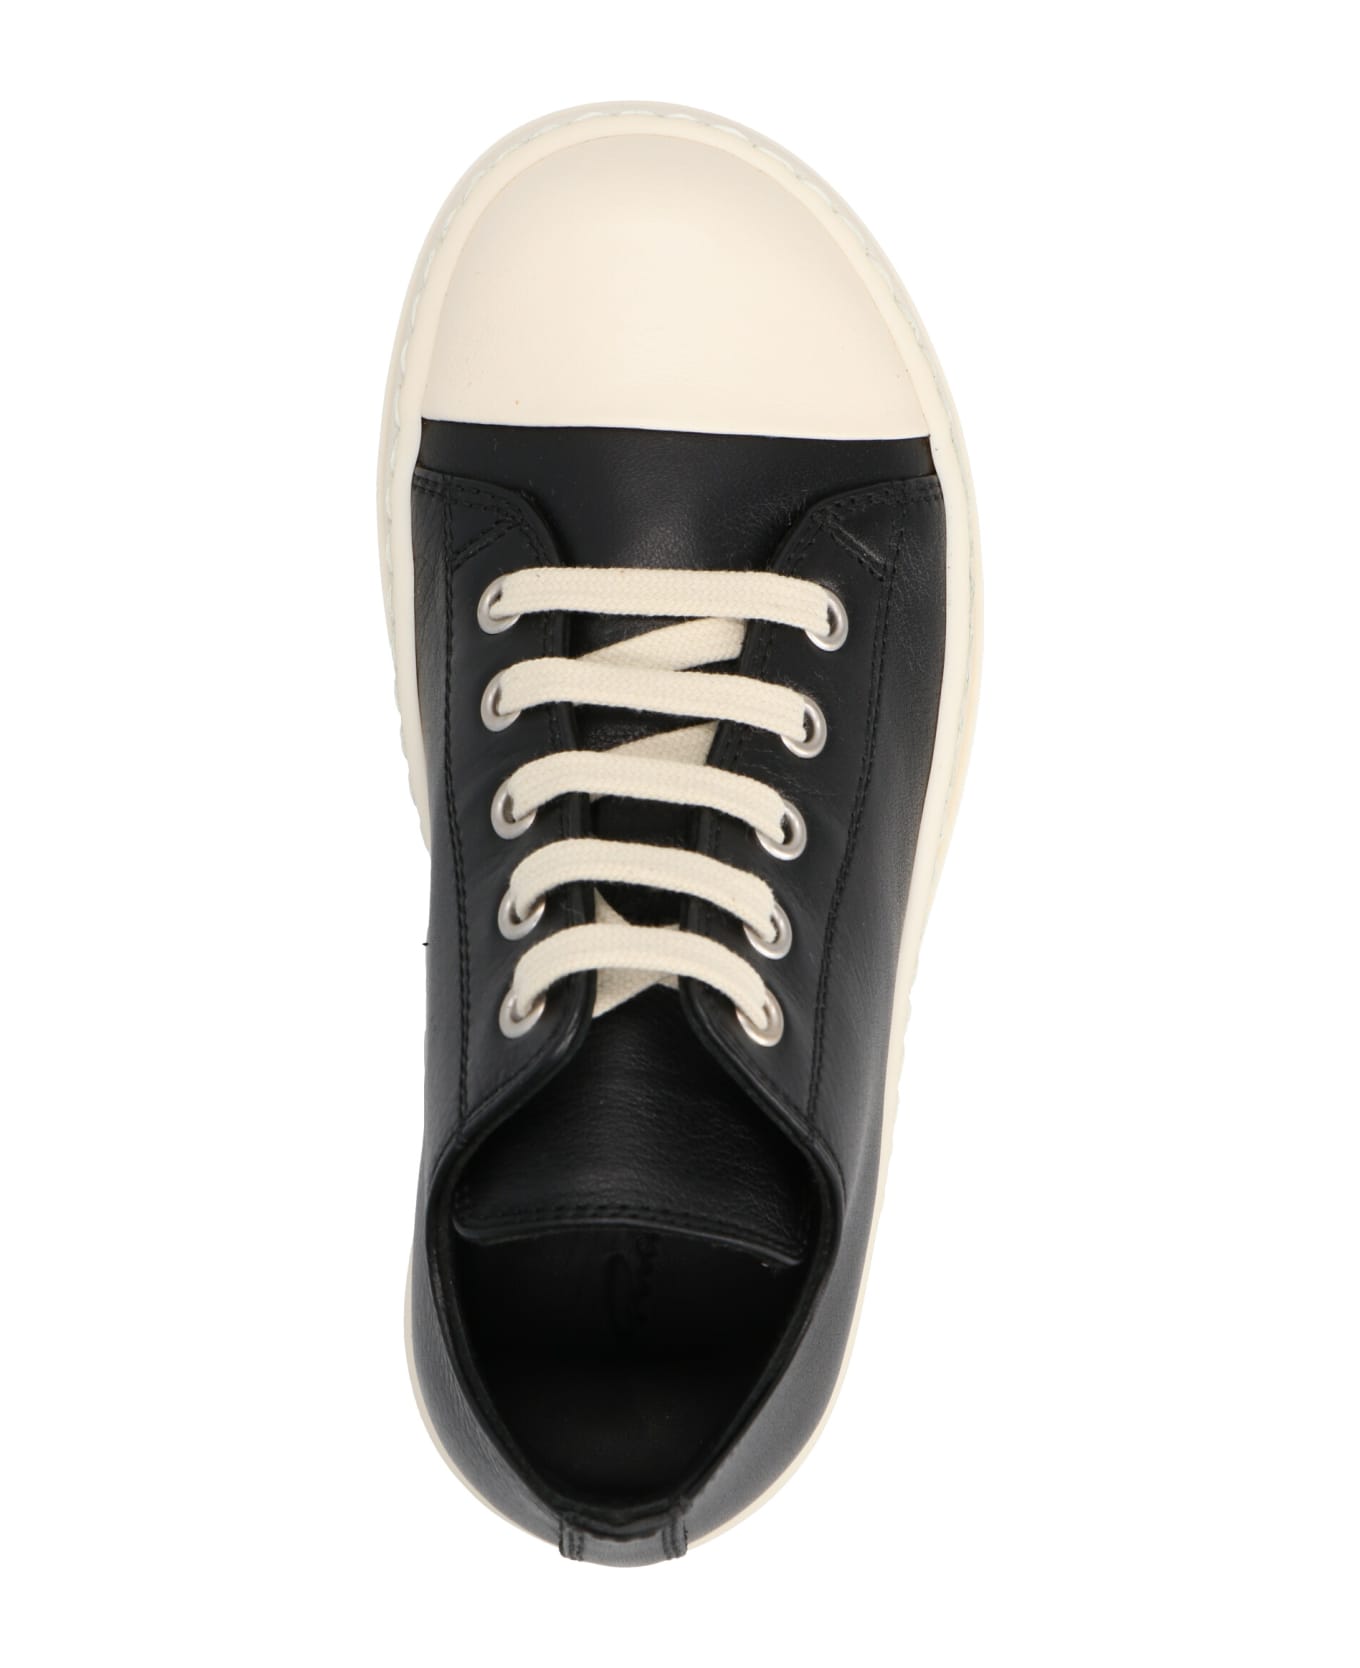 Rick Owens Leather Sneakers - White/Black